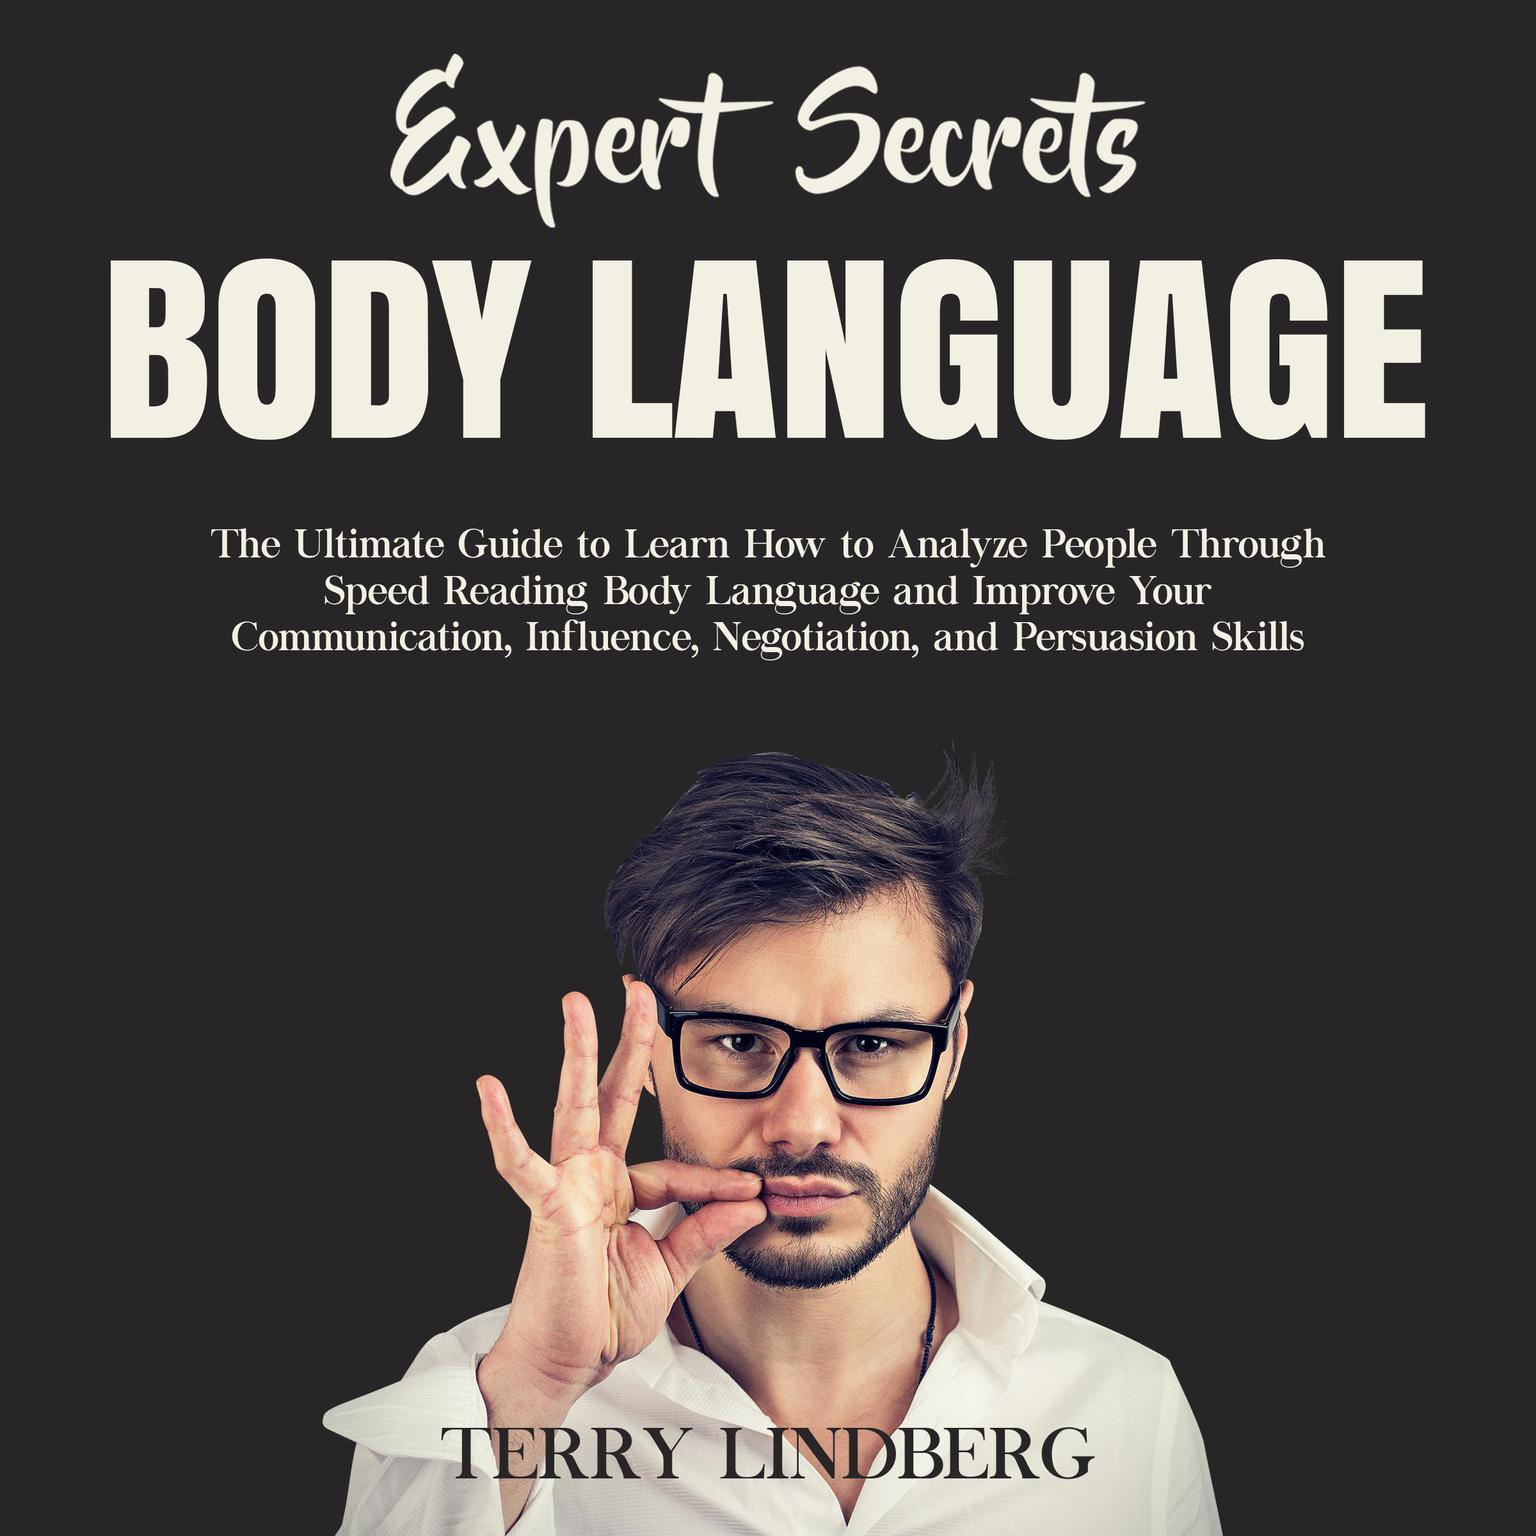 Expert Secrets – Body Language: The Ultimate Guide to Learn how to Analyze People Through Speed Reading Body Language and Improve Your Communication, Influence, Negotiation, and Persuasion Skills. Audiobook, by Terry Lindberg